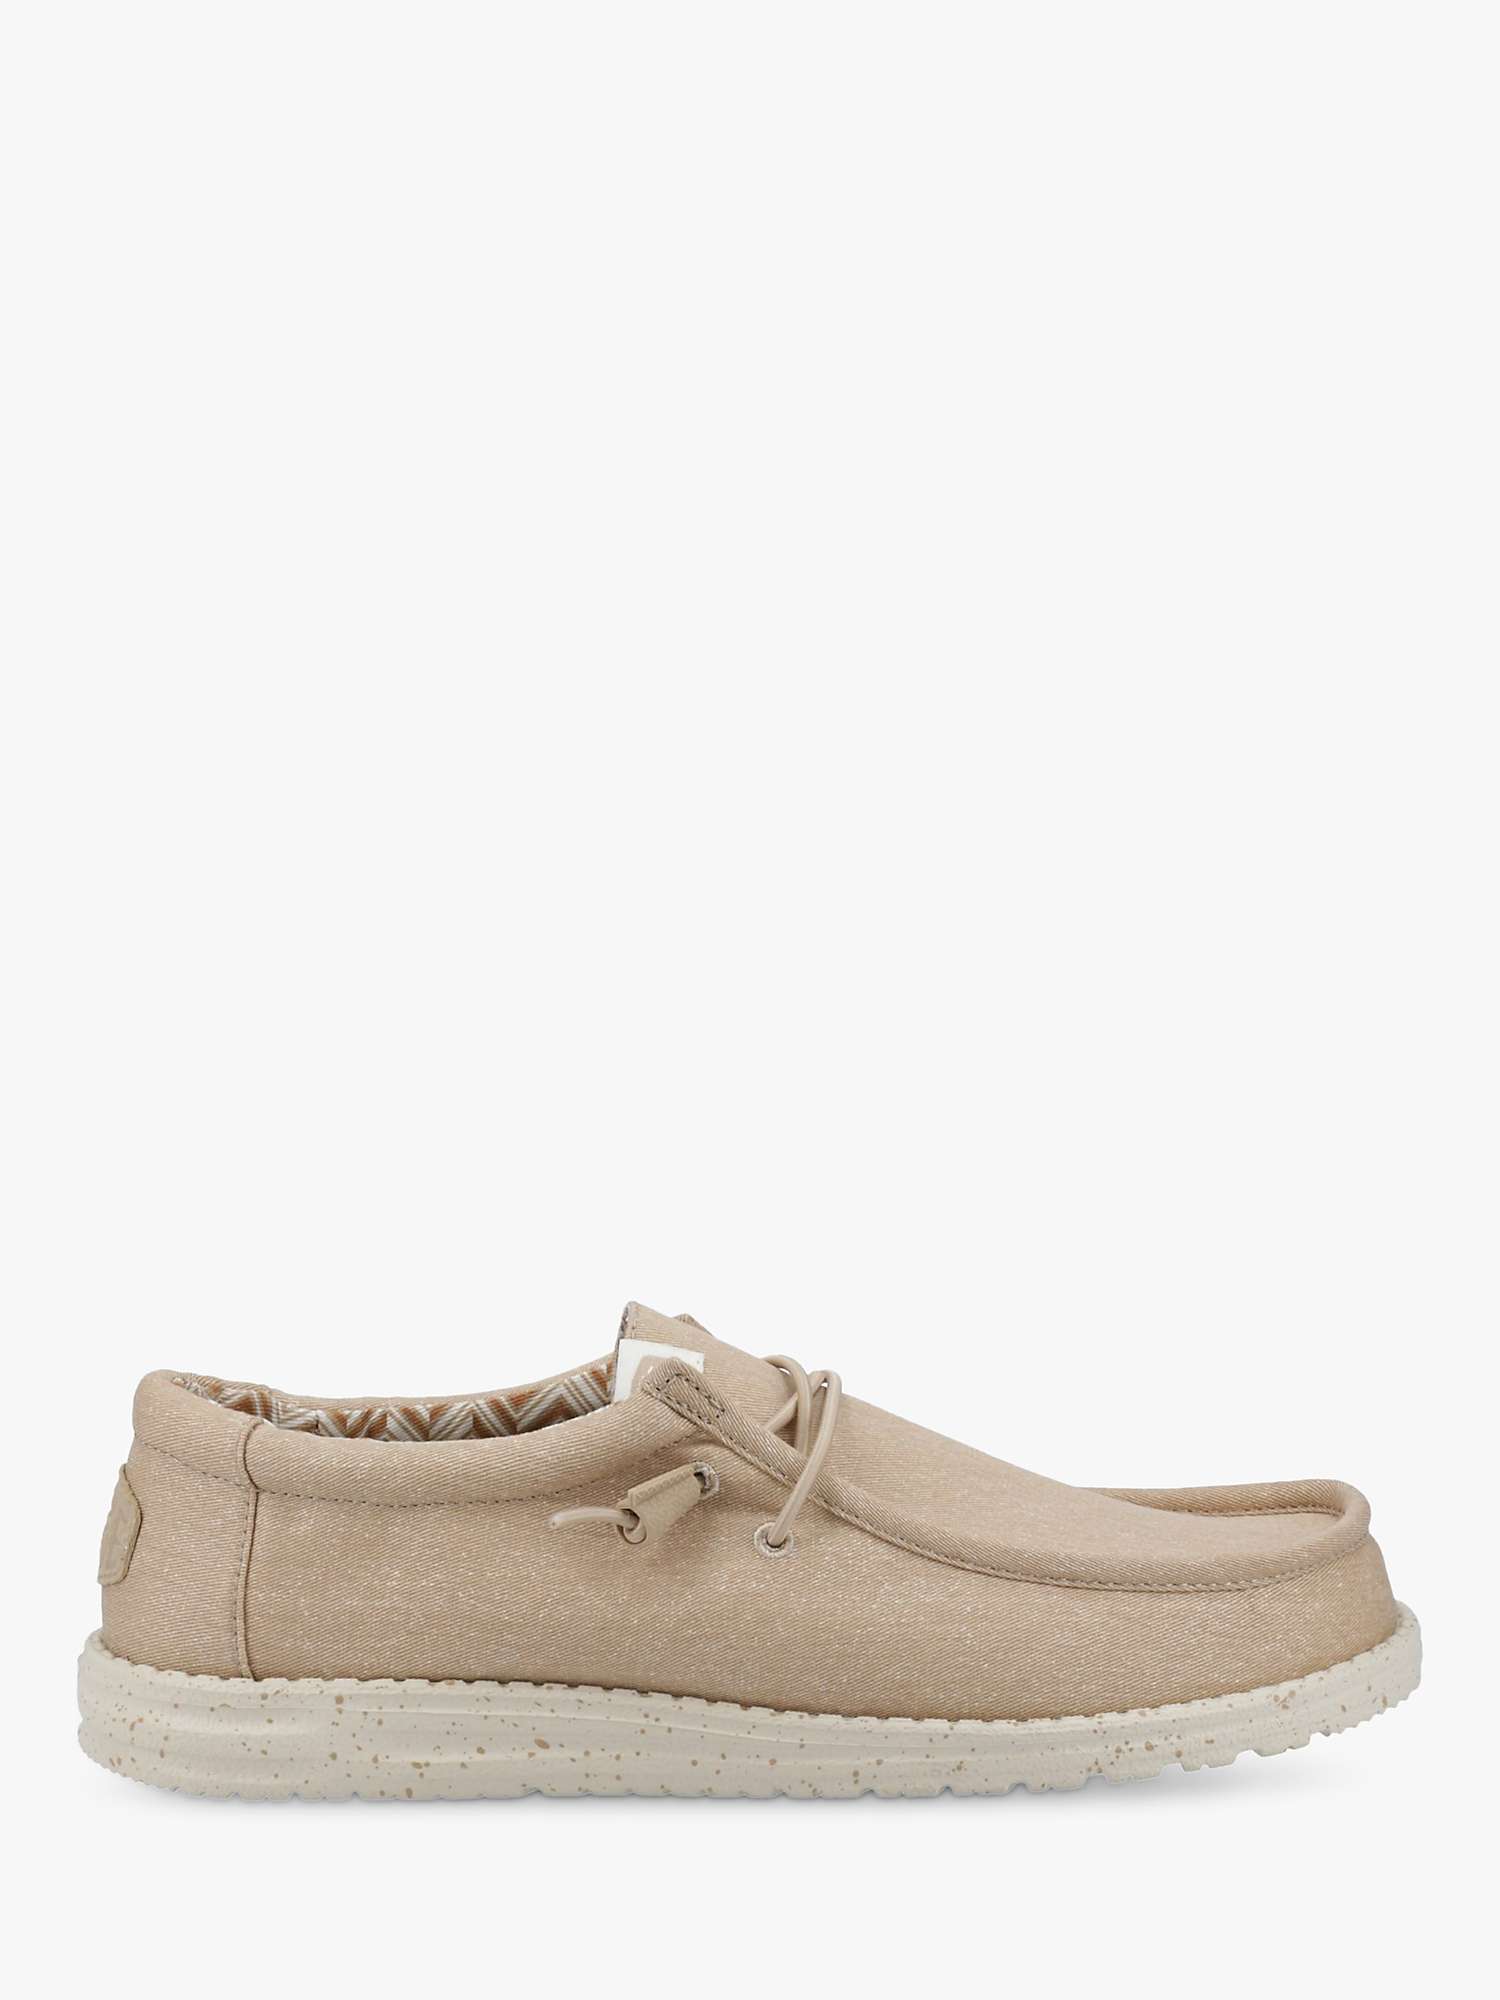 Buy Hey Dude Wally Canvas Shoes Online at johnlewis.com